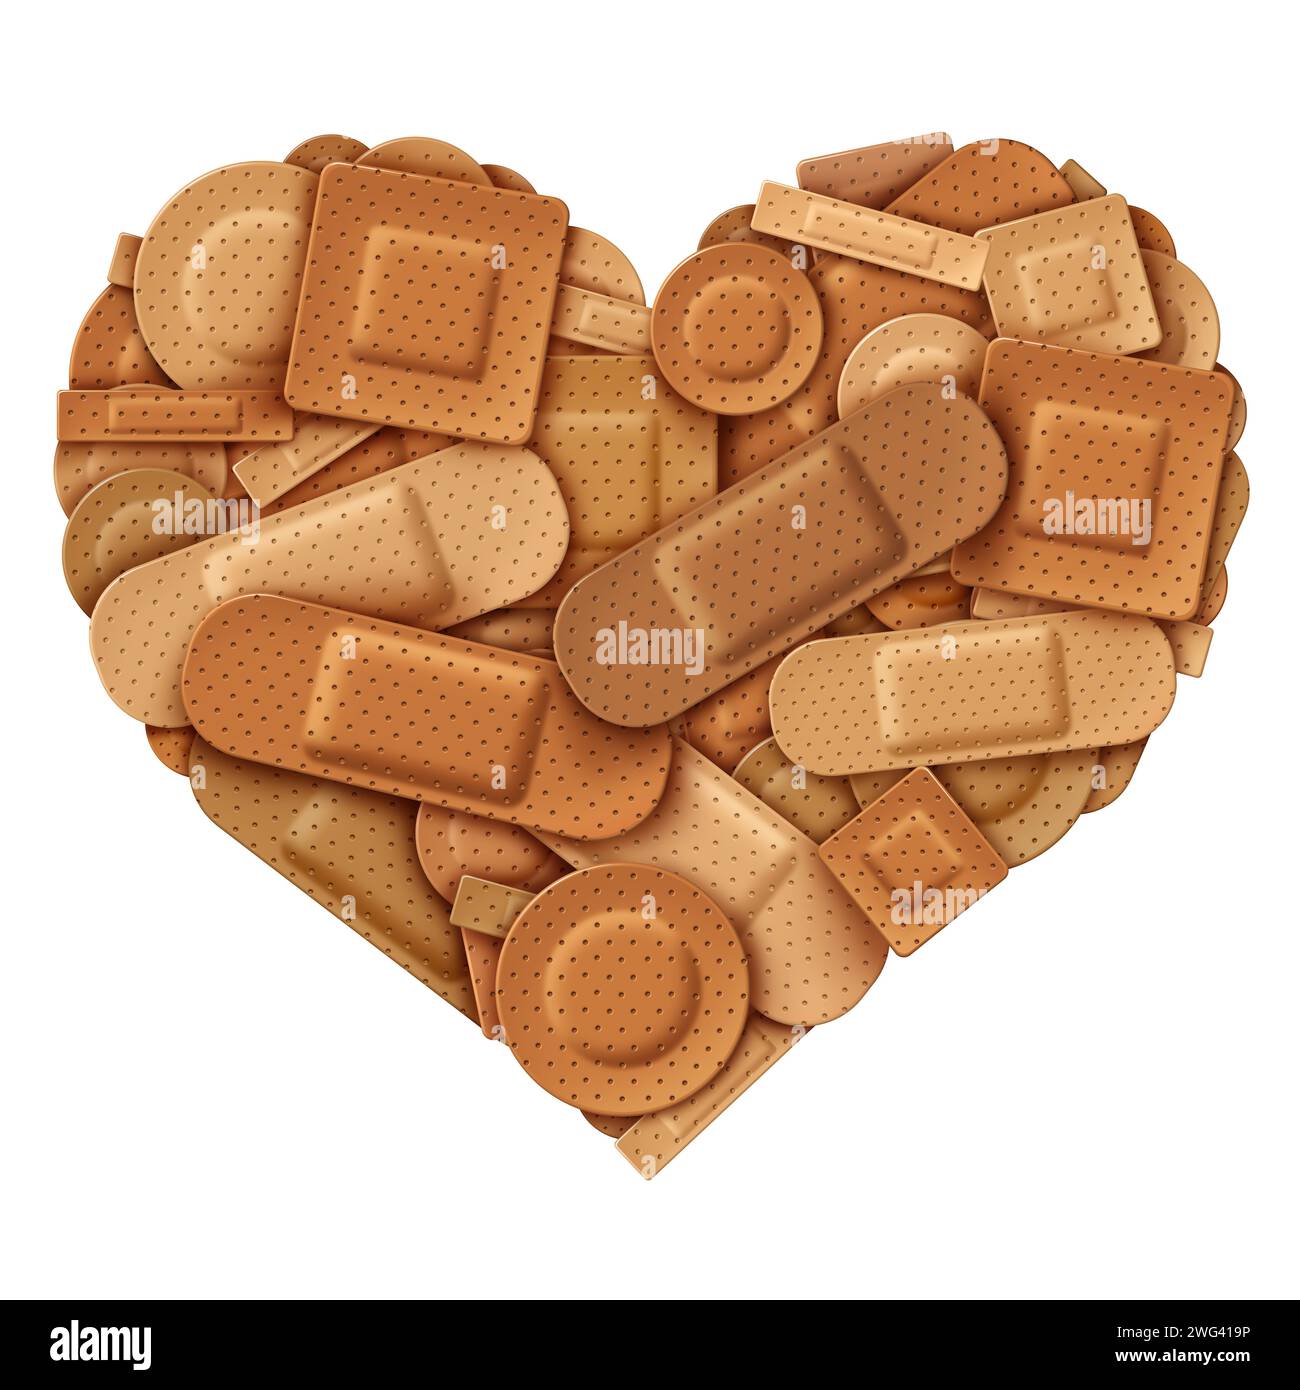 Broken Heart Symbol with a group of diverse Bandage and adhesive first aid bandages as an icon for emotional pain and heartbreak andlost love Stock Photo